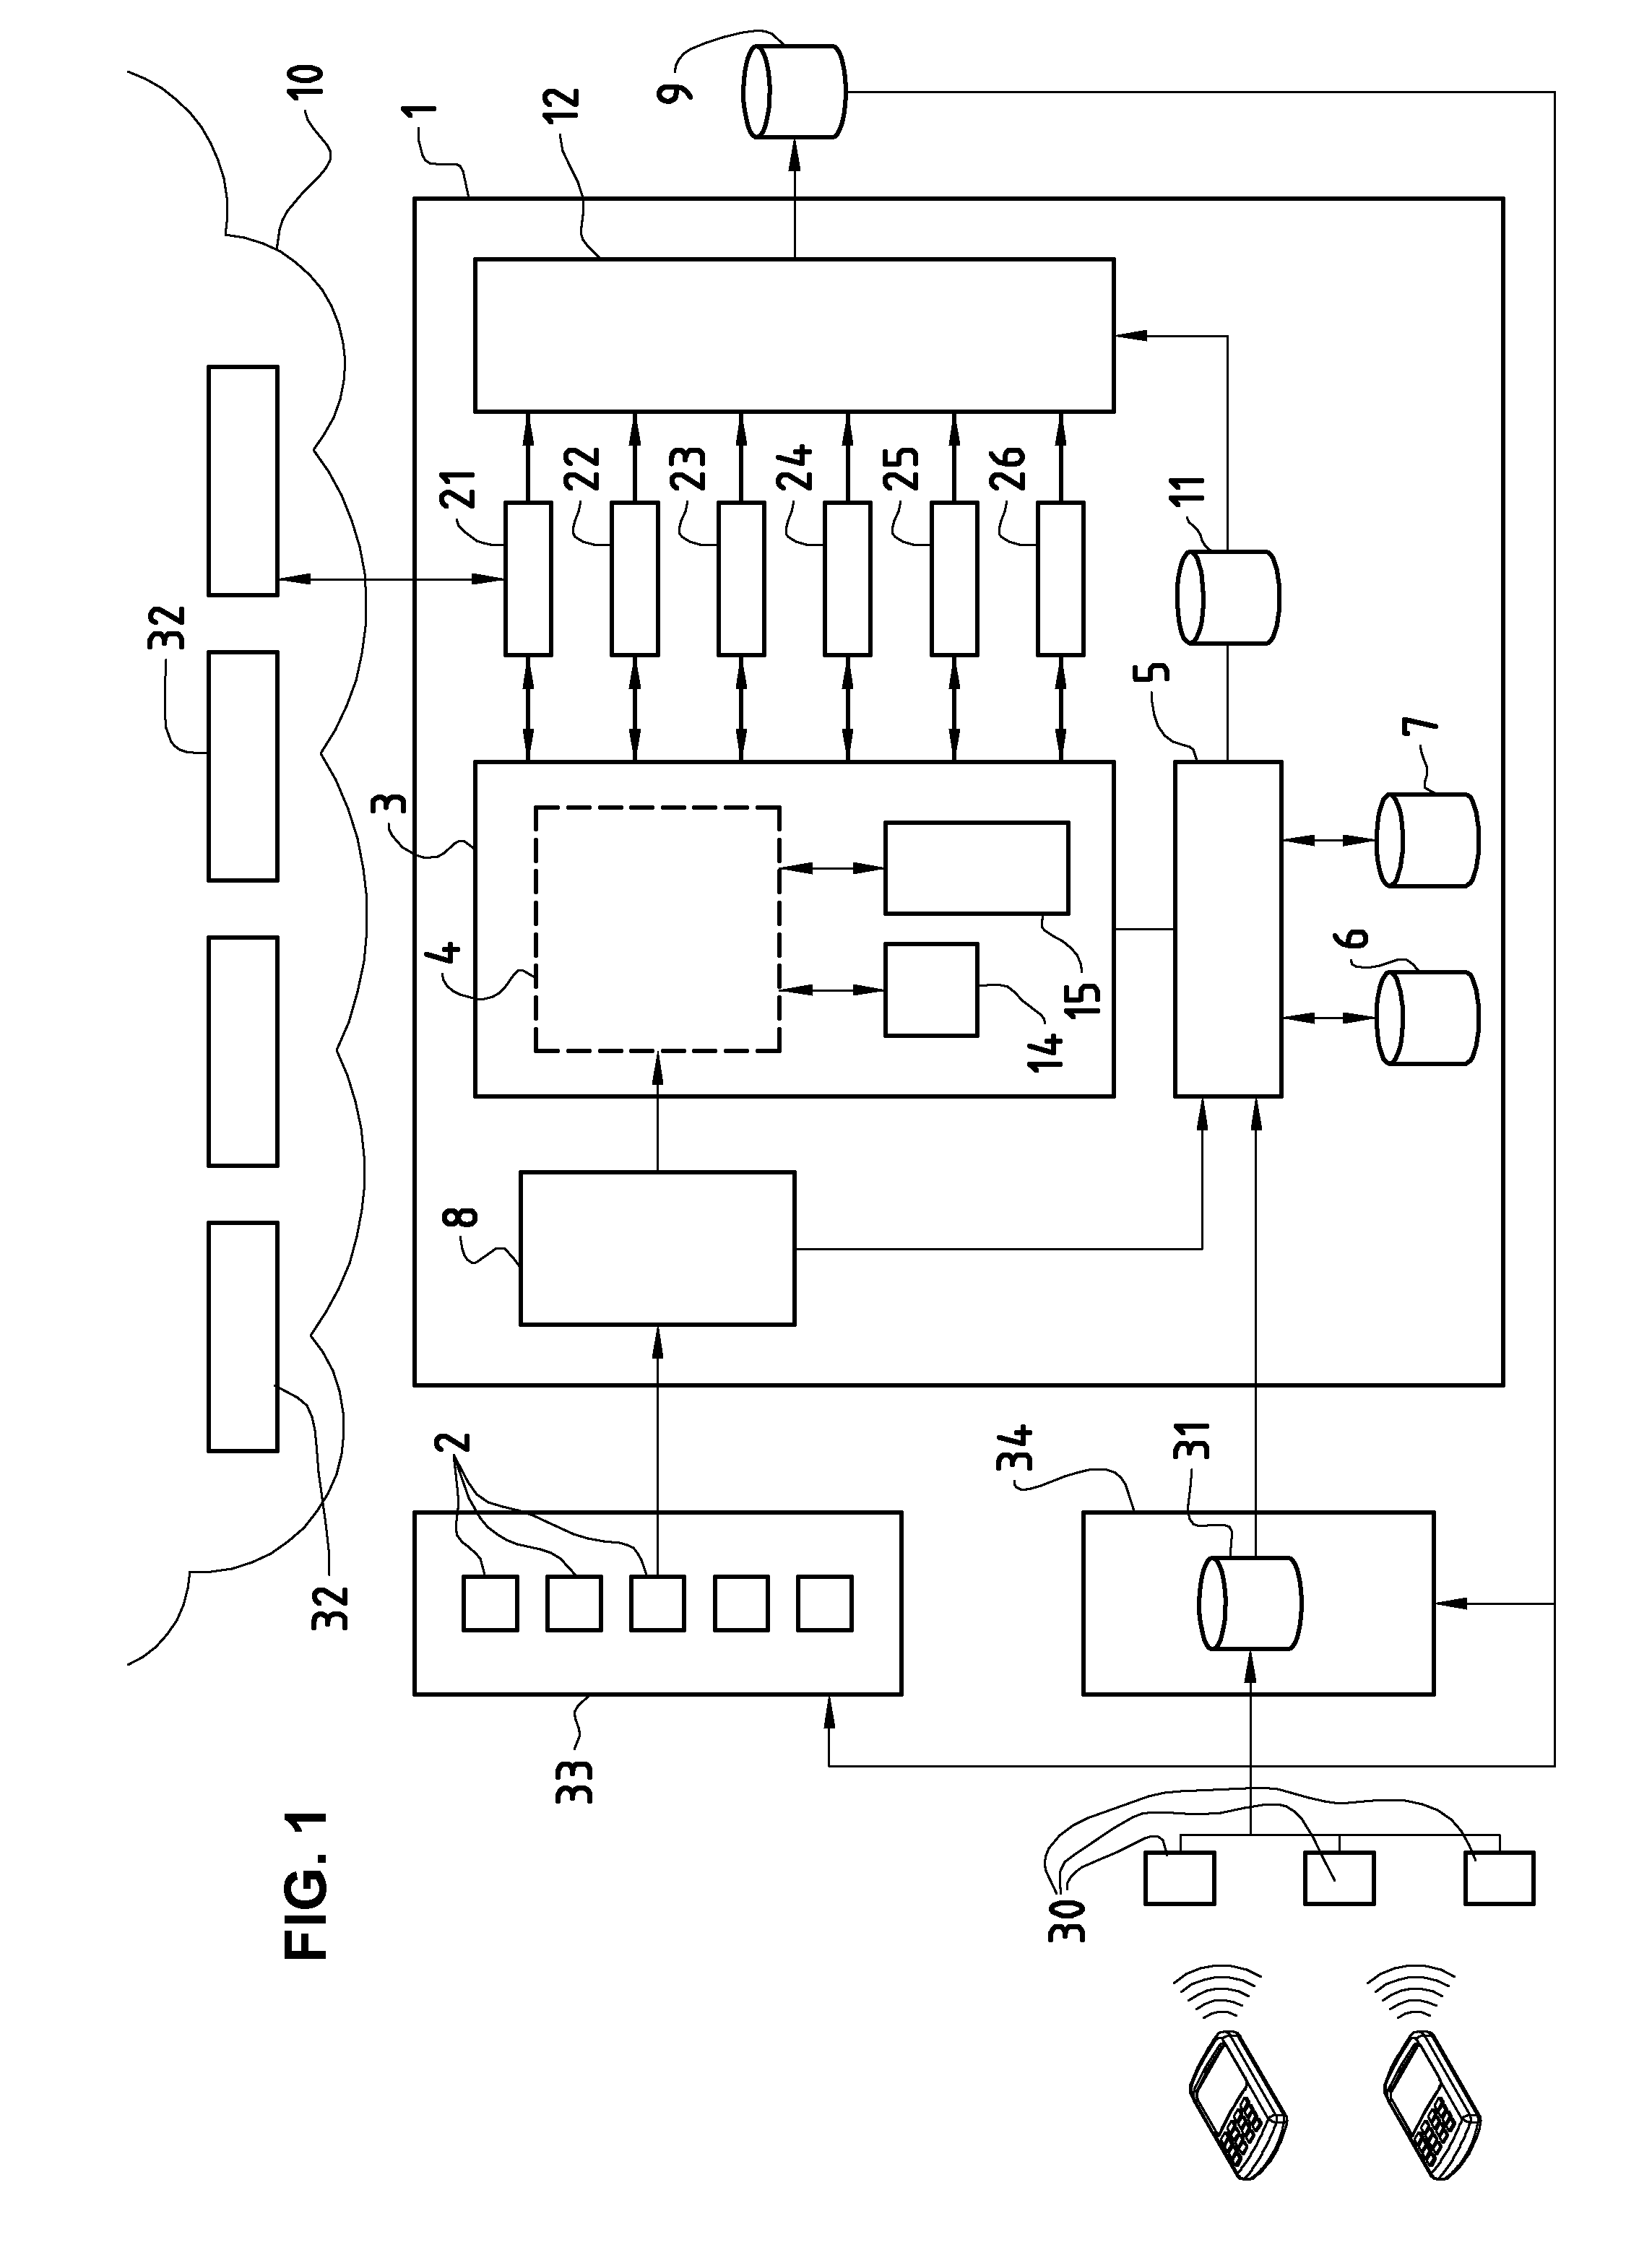 Method and system for application security evaluation